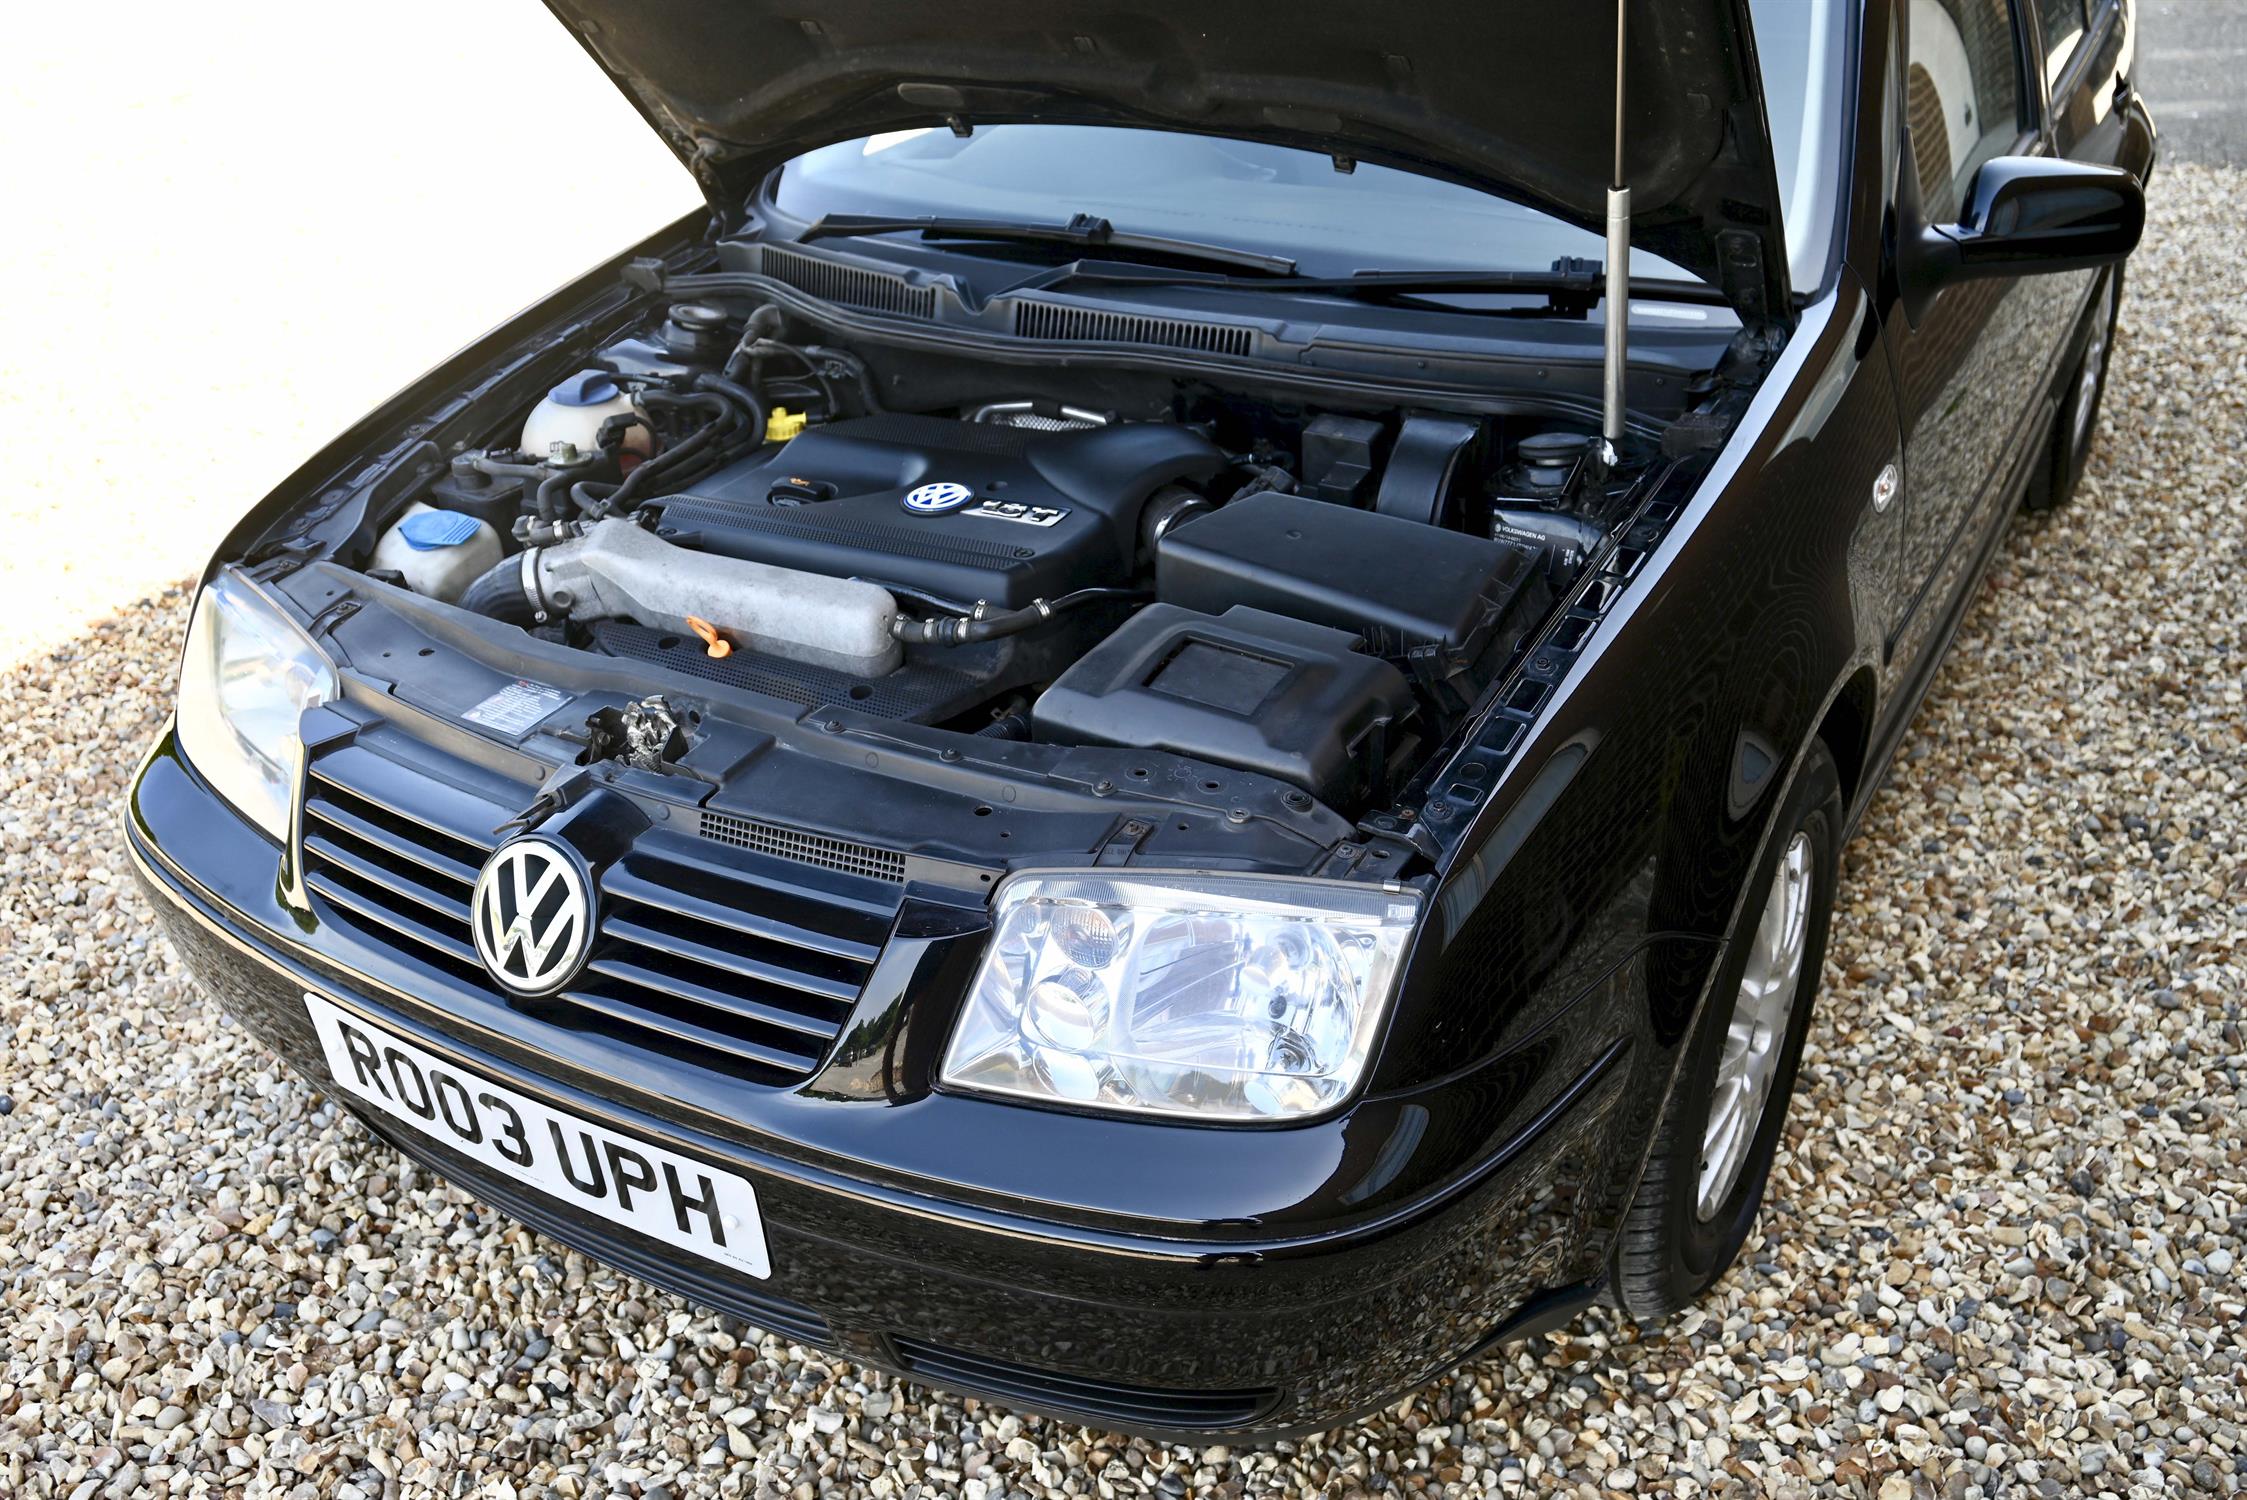 2003 (Mk 4) VW Bora ST 1.8T Black coachwork with charcoal cloth upholstery. 5-speed manual, - Image 12 of 16